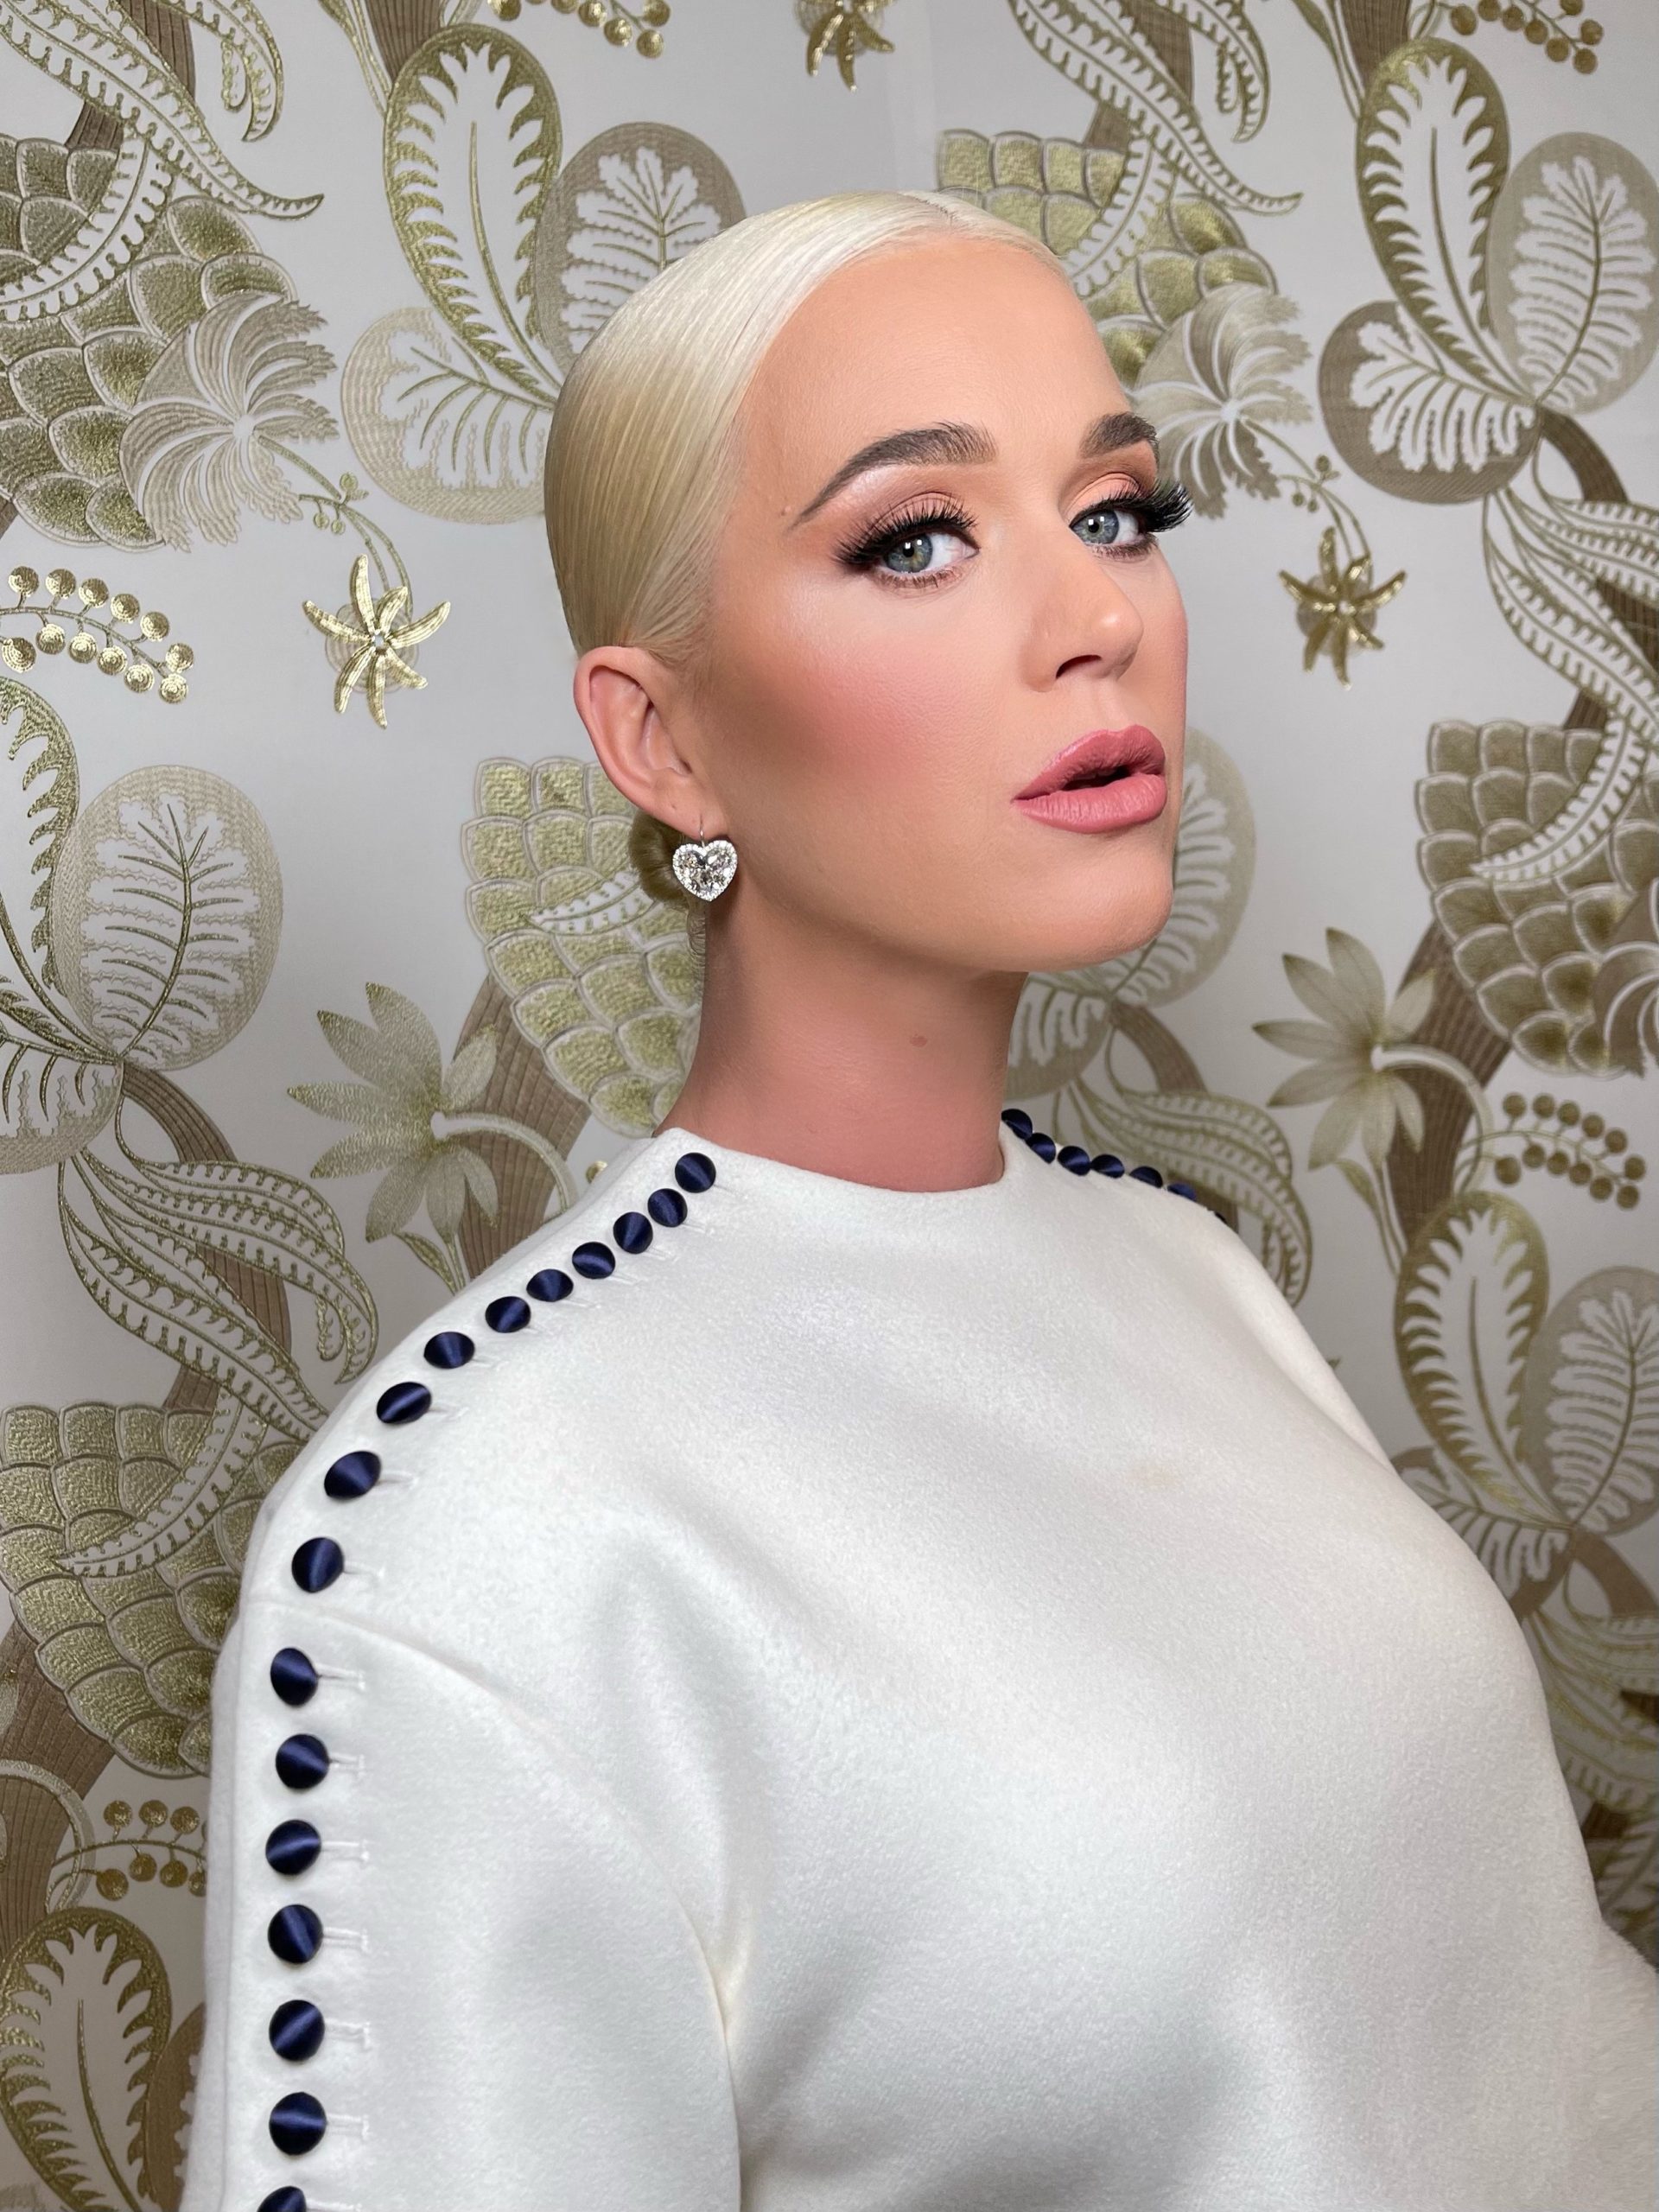 Katy Perry Made a Last-Minute Change to Her Inauguration Makeup Look